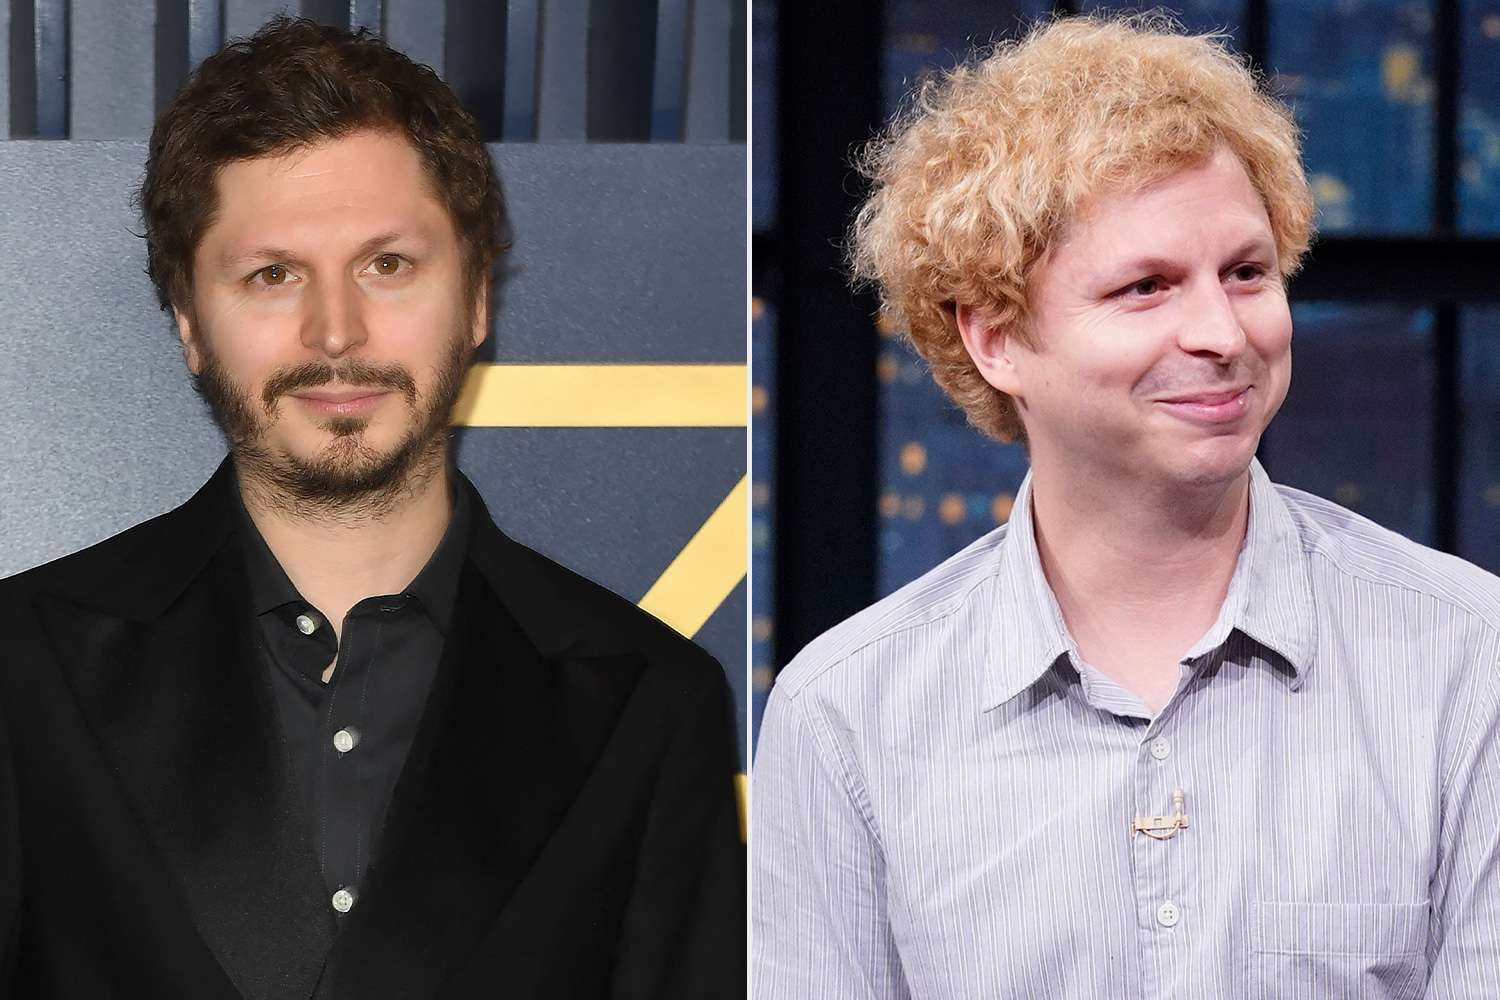 Michael Cera apologizes to Seth Meyers for new blond hair: 'My hair is in a weird place'